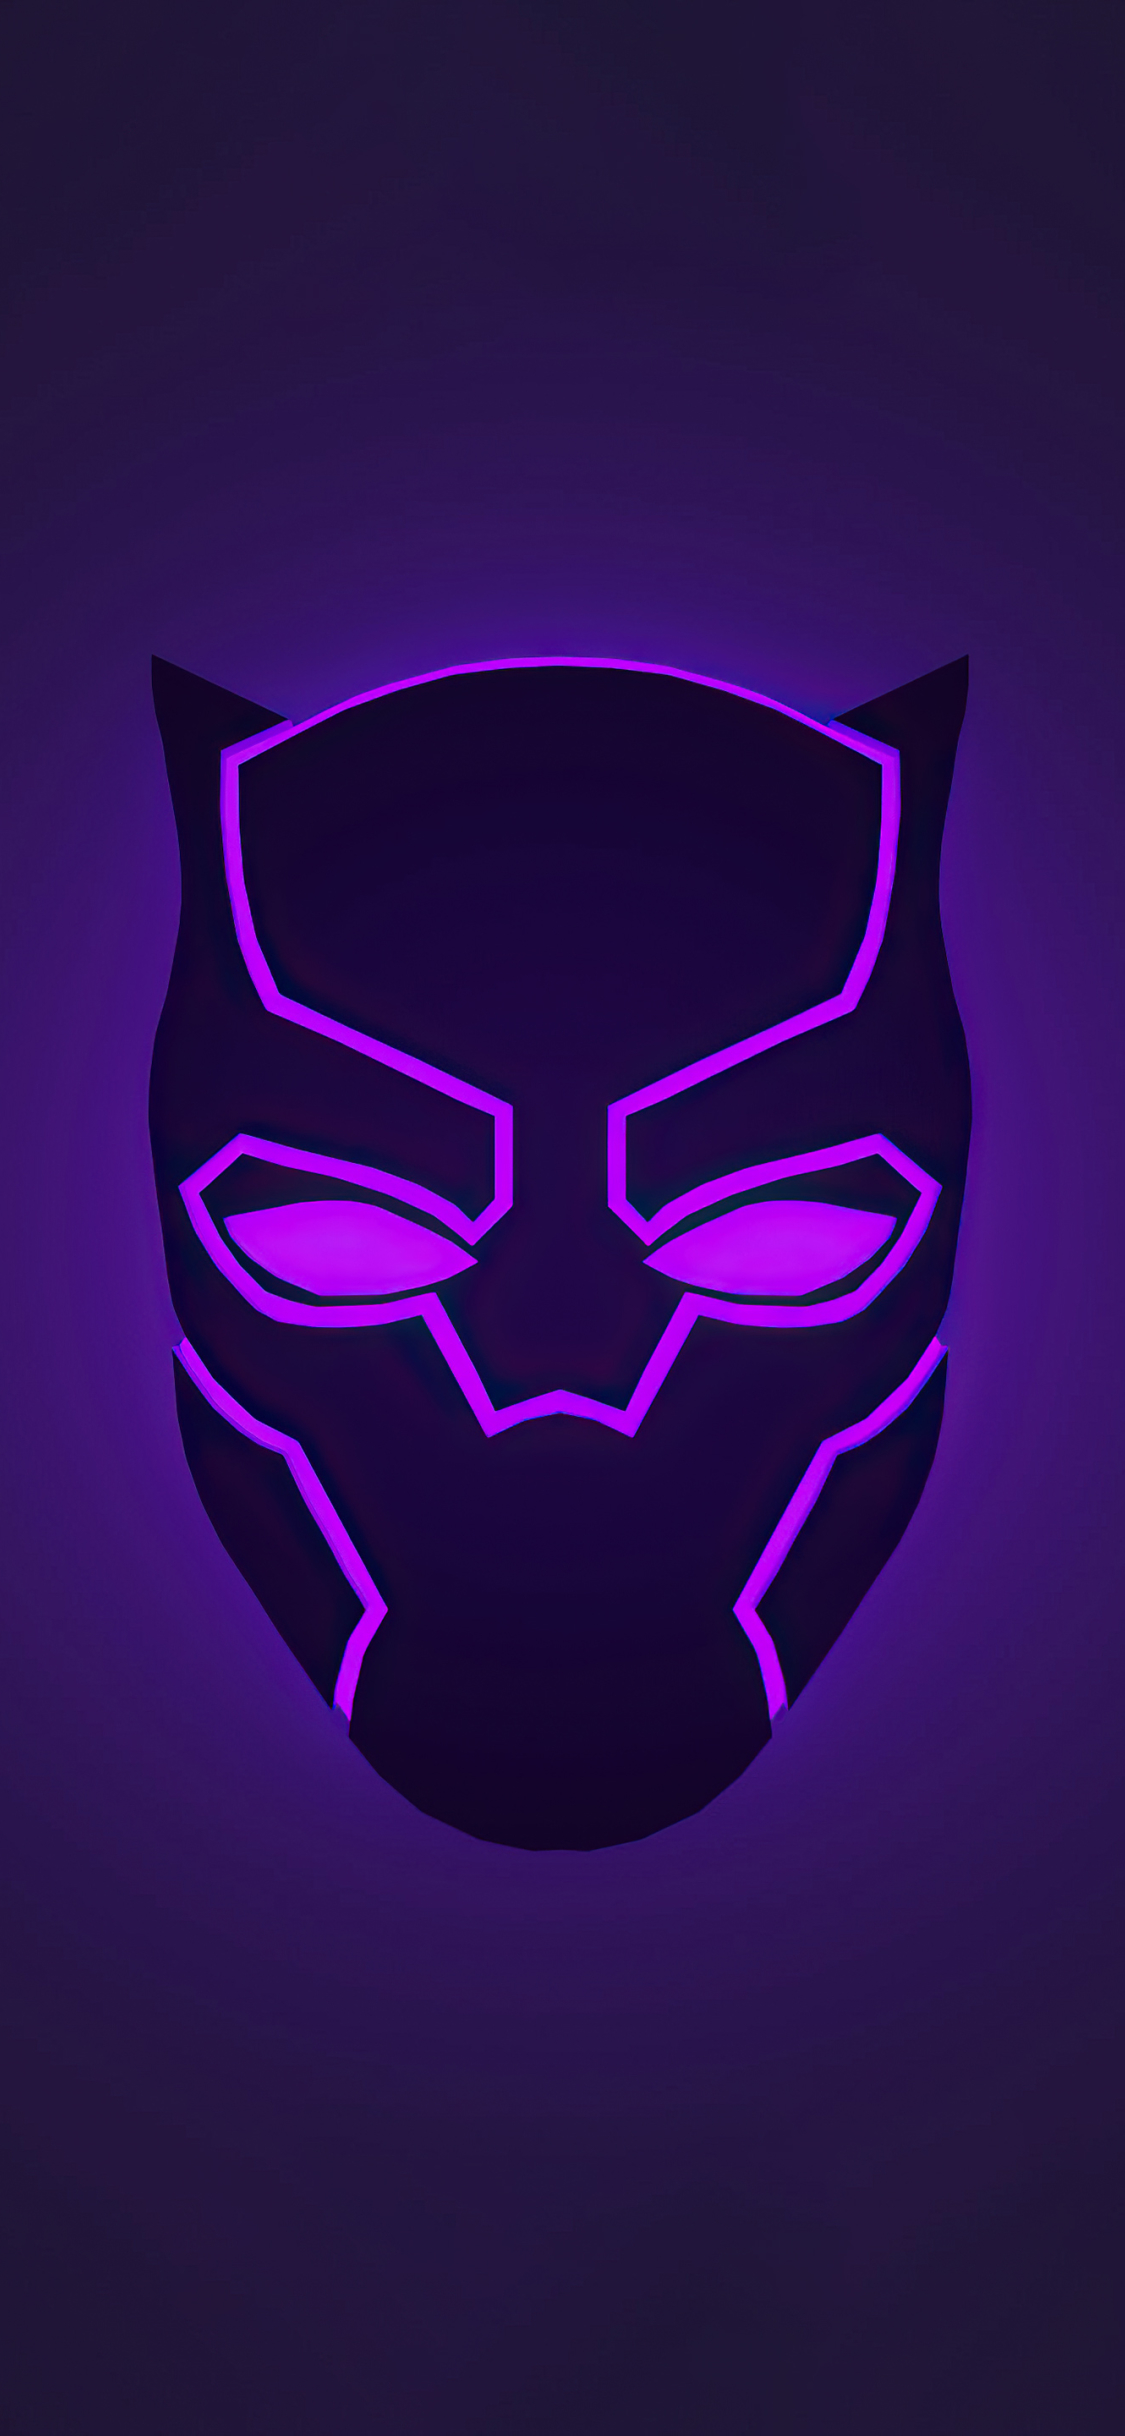 1125x2436 Black Panther Helmet Illustration 5k Iphone XS,Iphone 10,Iphone X  Wallpaper, HD Superheroes 4K Wallpapers, Images, Photos and Background -  Wallpapers Den